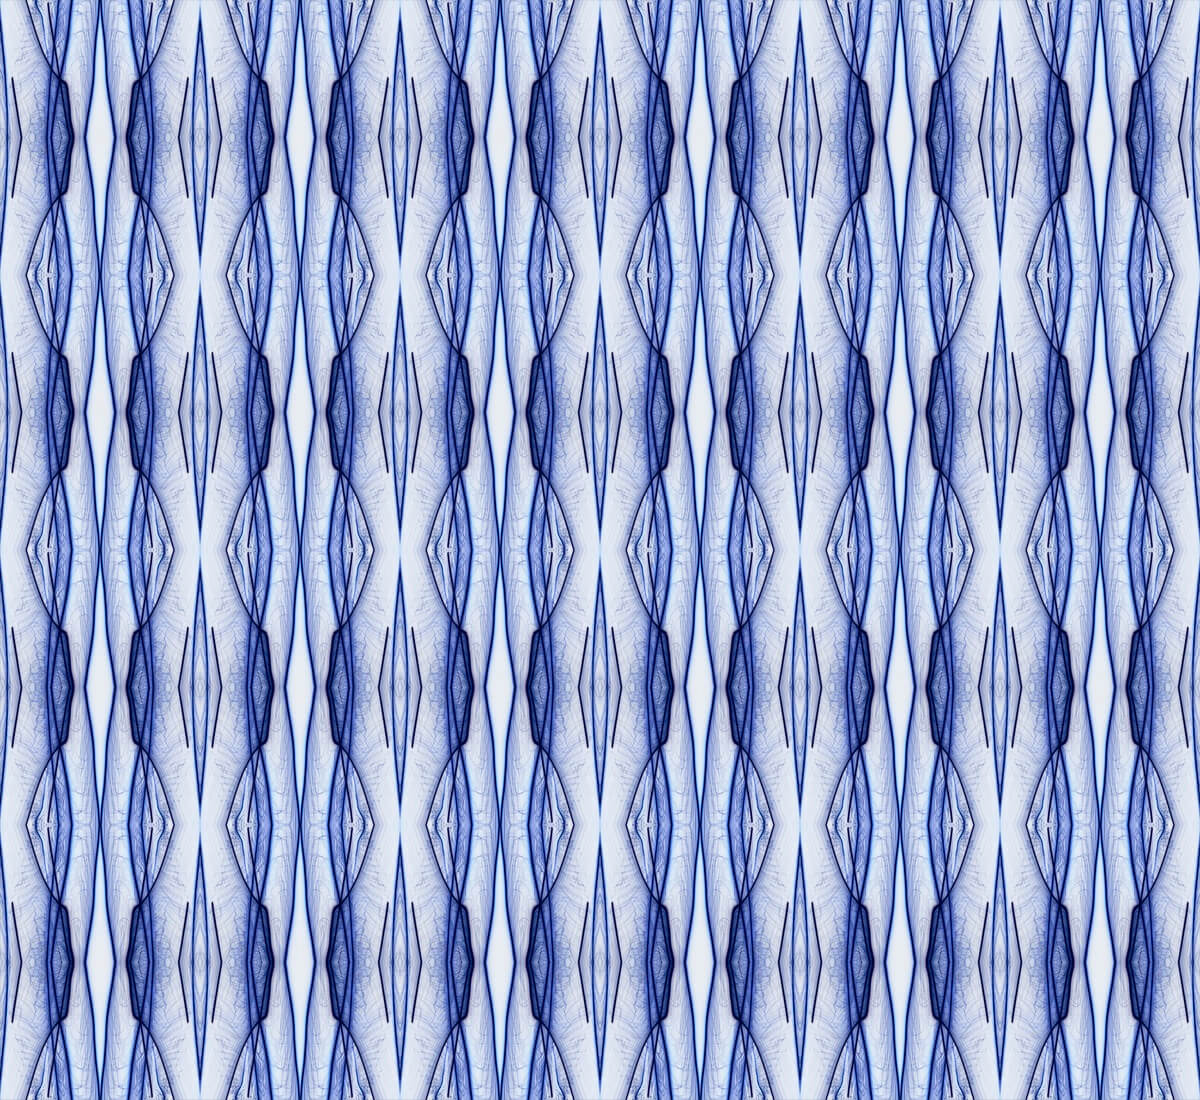 Deco pattern in blue with white background